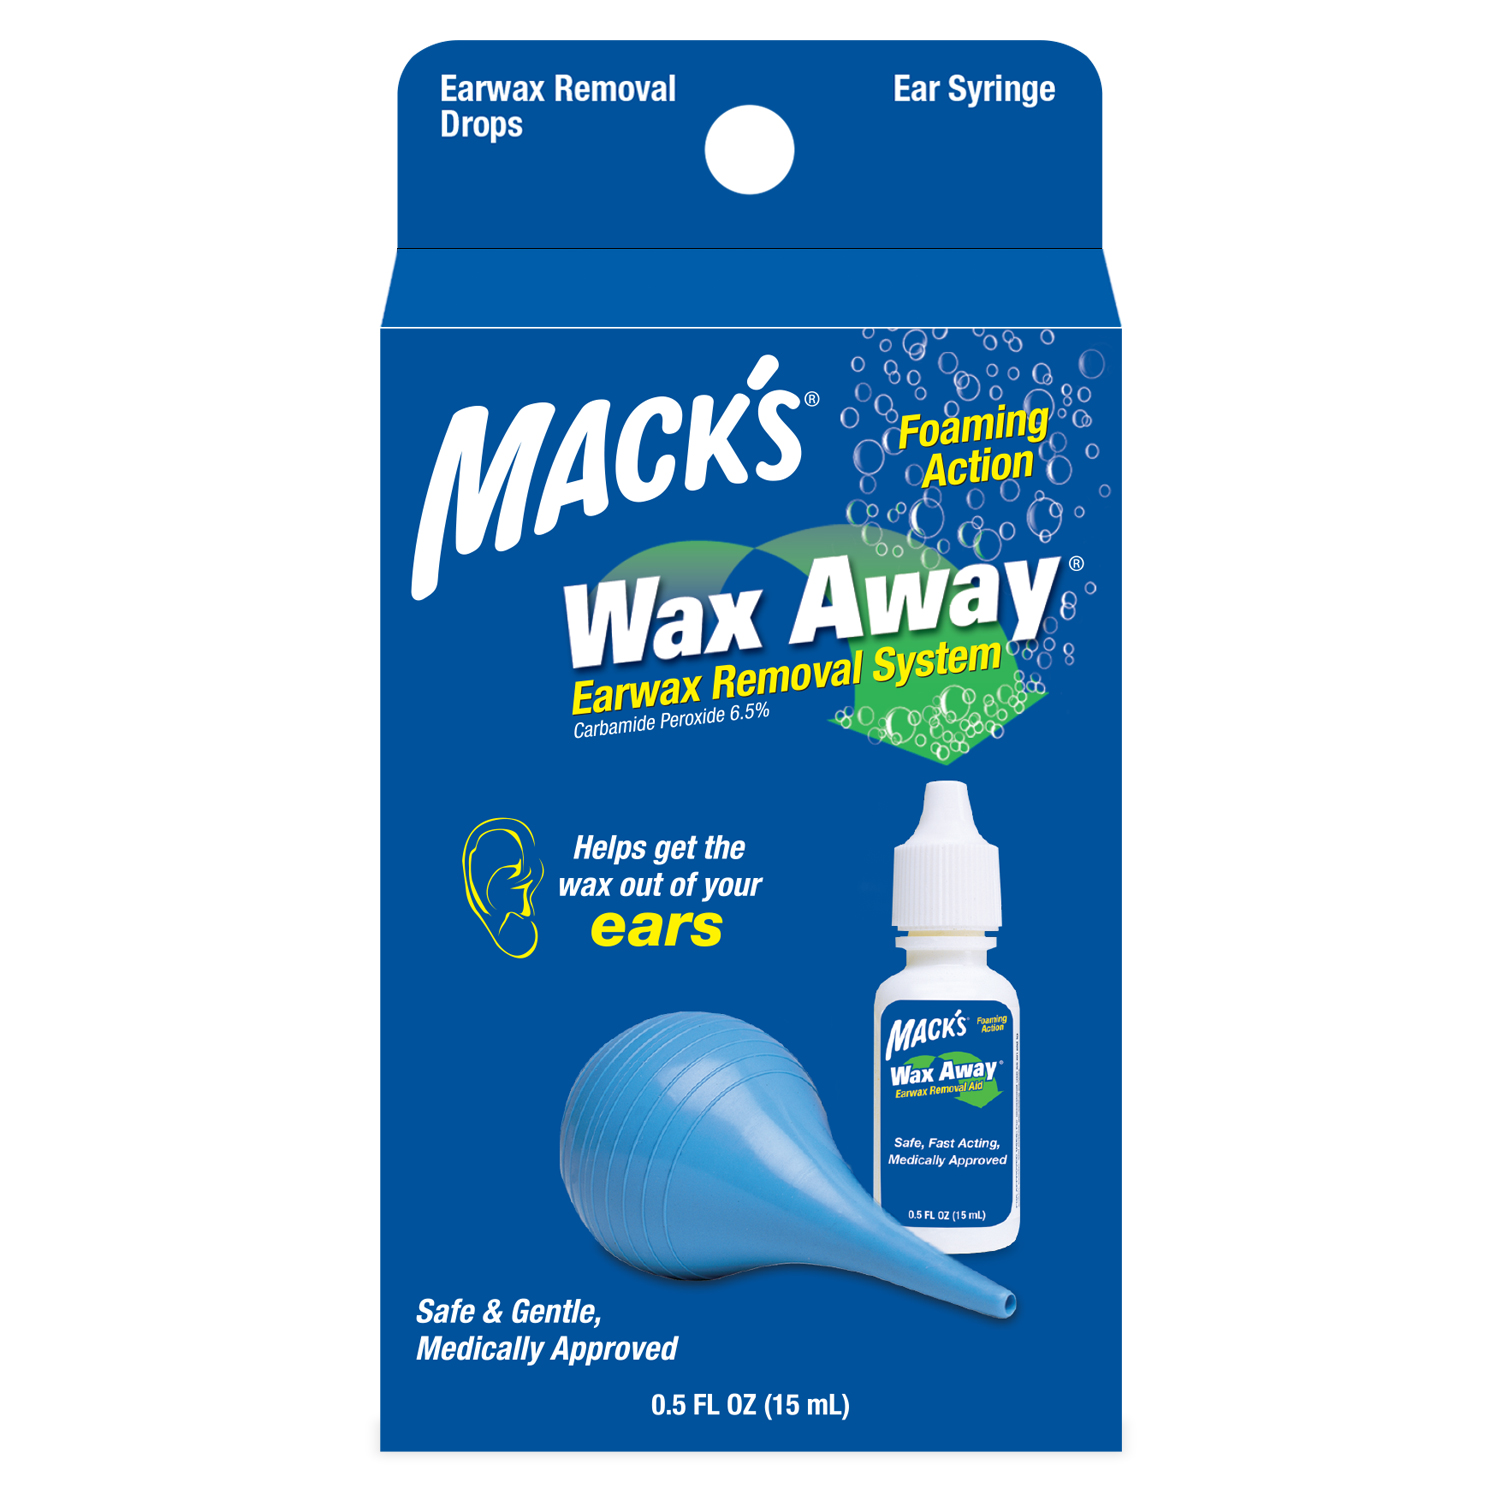 Wax Away® Earwax Removal System